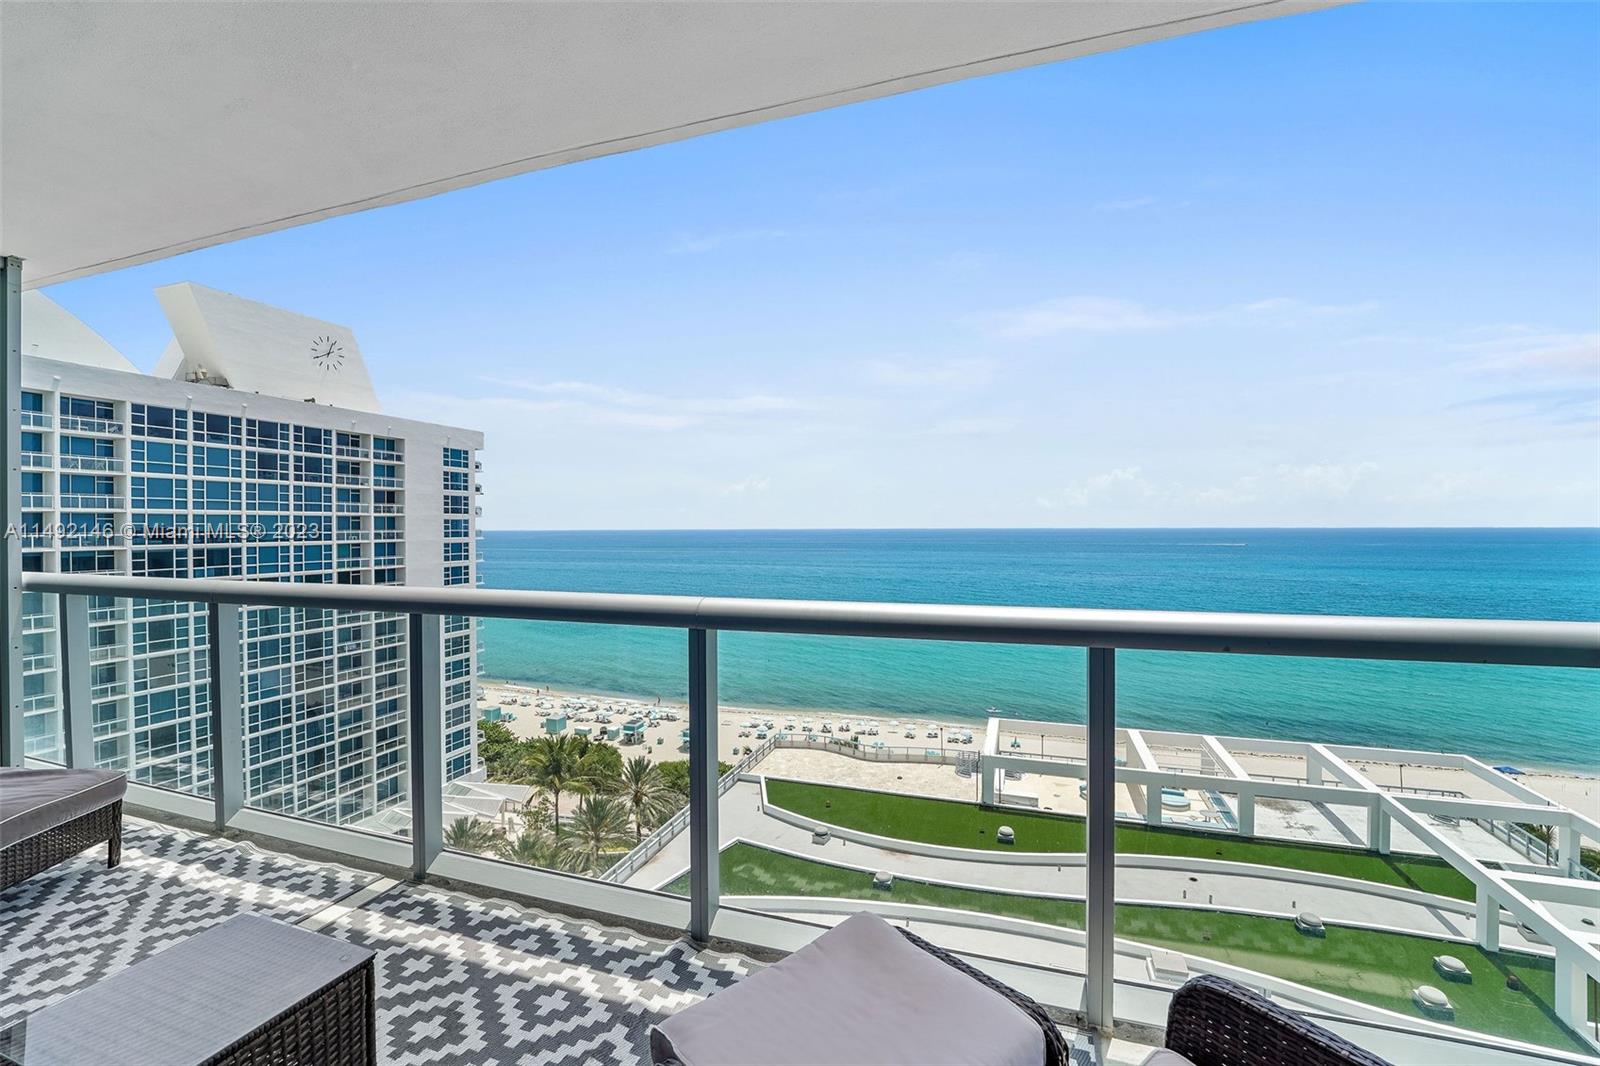 Rarely offered DIRECT OCEAN VIEW from all rooms, 1 bedroom, 1 ½ bathroom unit at Carillon Miami Wellness Resort, a premier oceanfront luxury property.  Balcony spans the entire unit.  Luxuriate in South Florida’s largest spa & thermal experience.  Easy access through Indoor connector to 70,000 sqft hotel, spa & fitness center.  Classes offered 7 days a week, from morning until evening.  Owner receives 8 spaces (names) on POL, which is, in essence, 8 “memberships” for unlimited use of amenities and classes.  Restaurant; bar; Corner Store; salon; 4 pools; 24hr security; wellness staff; concierge. Great walking neighborhood with all conveniences, including Publix across street. Only all cash offers considered. Tenant occupied with lease expiring 10/14/24. Restricted access for showings.